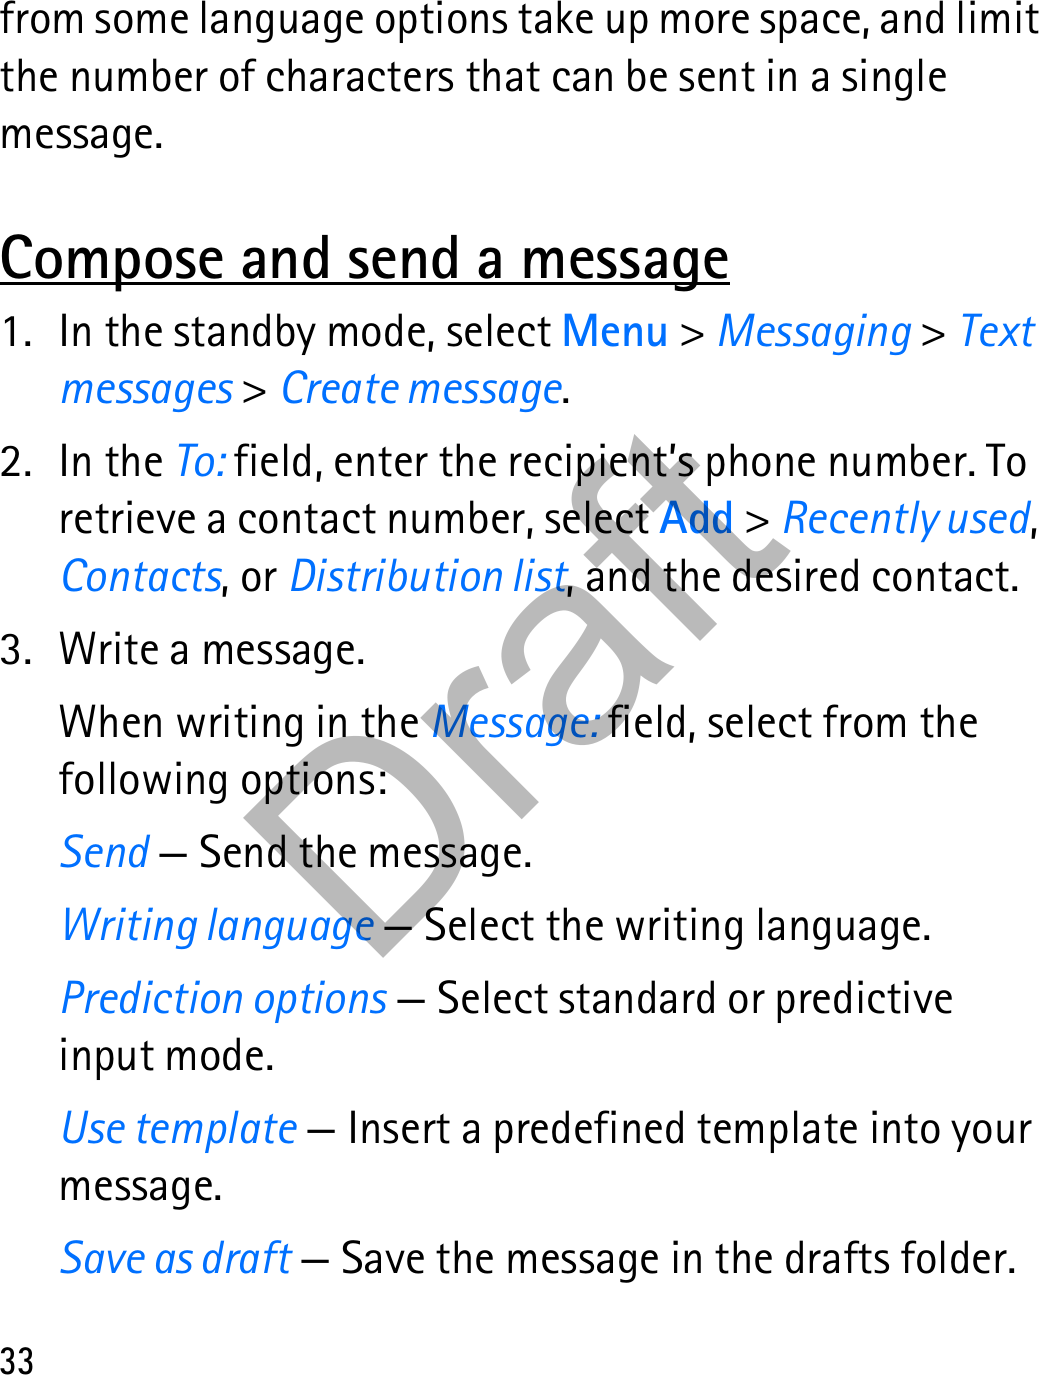 33from some language options take up more space, and limit the number of characters that can be sent in a single message.Compose and send a message1. In the standby mode, select Menu &gt; Messaging &gt; Text messages &gt; Create message.2. In the To: field, enter the recipient’s phone number. To retrieve a contact number, select Add &gt; Recently used, Contacts, or Distribution list, and the desired contact.3. Write a message.When writing in the Message: field, select from the following options:Send — Send the message.Writing language — Select the writing language.Prediction options — Select standard or predictive input mode.Use template — Insert a predefined template into your message.Save as draft — Save the message in the drafts folder.Draft